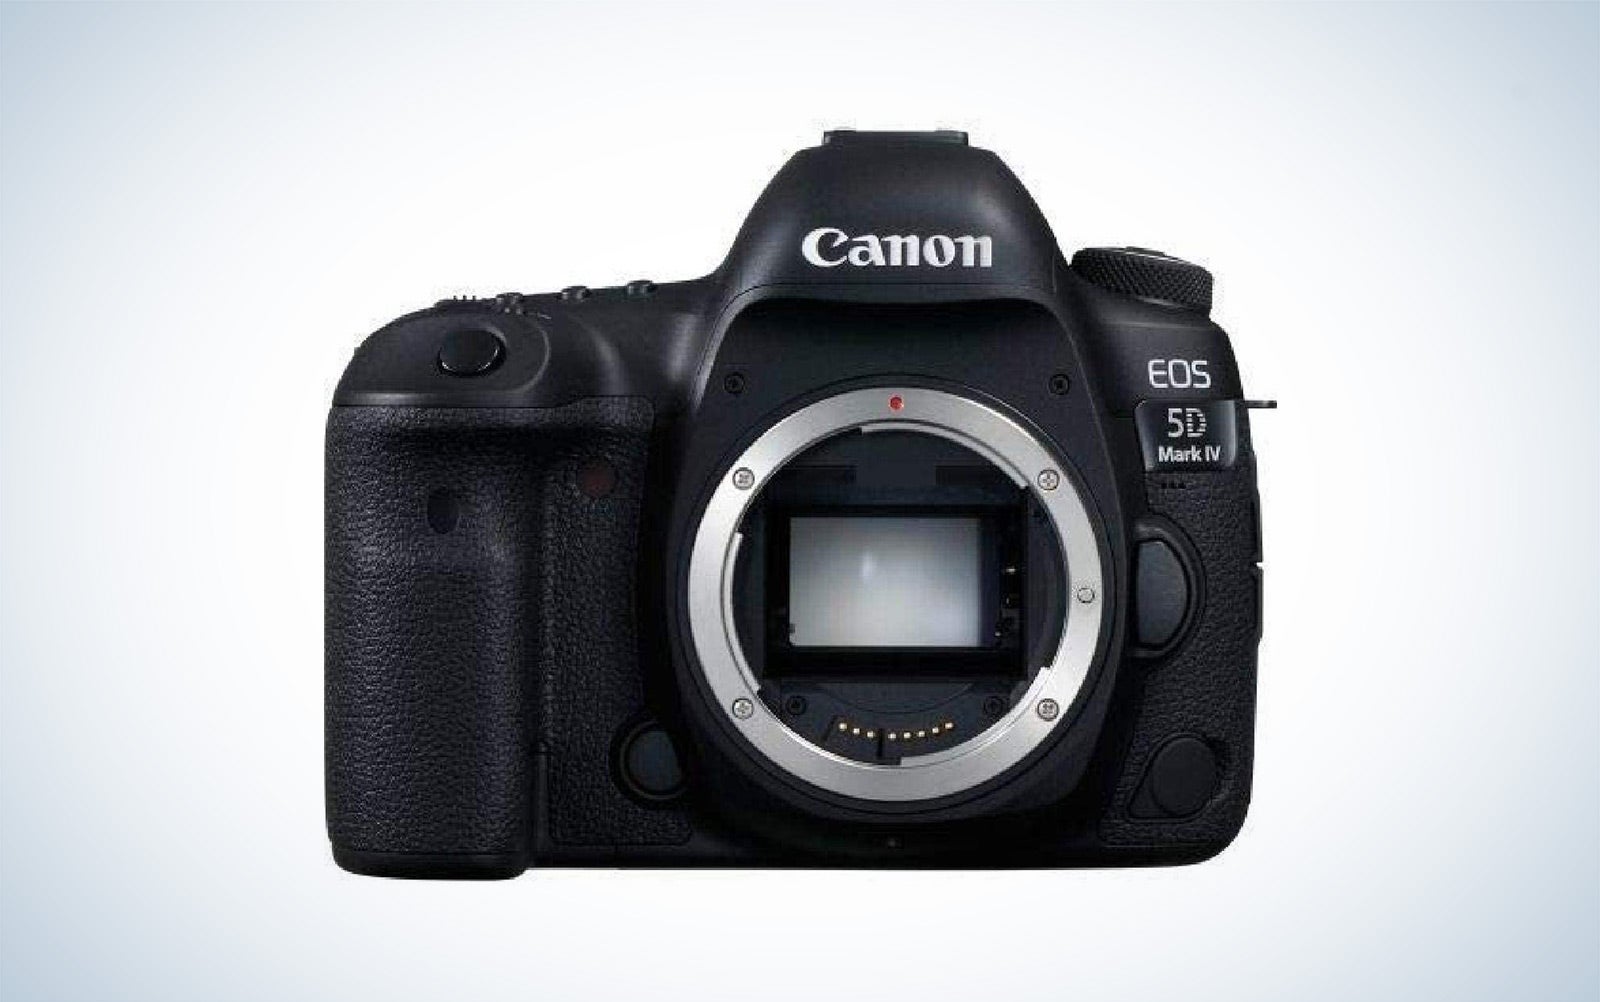 The Canon EOS 5D Mark IV is the best professional Canon DSLR.